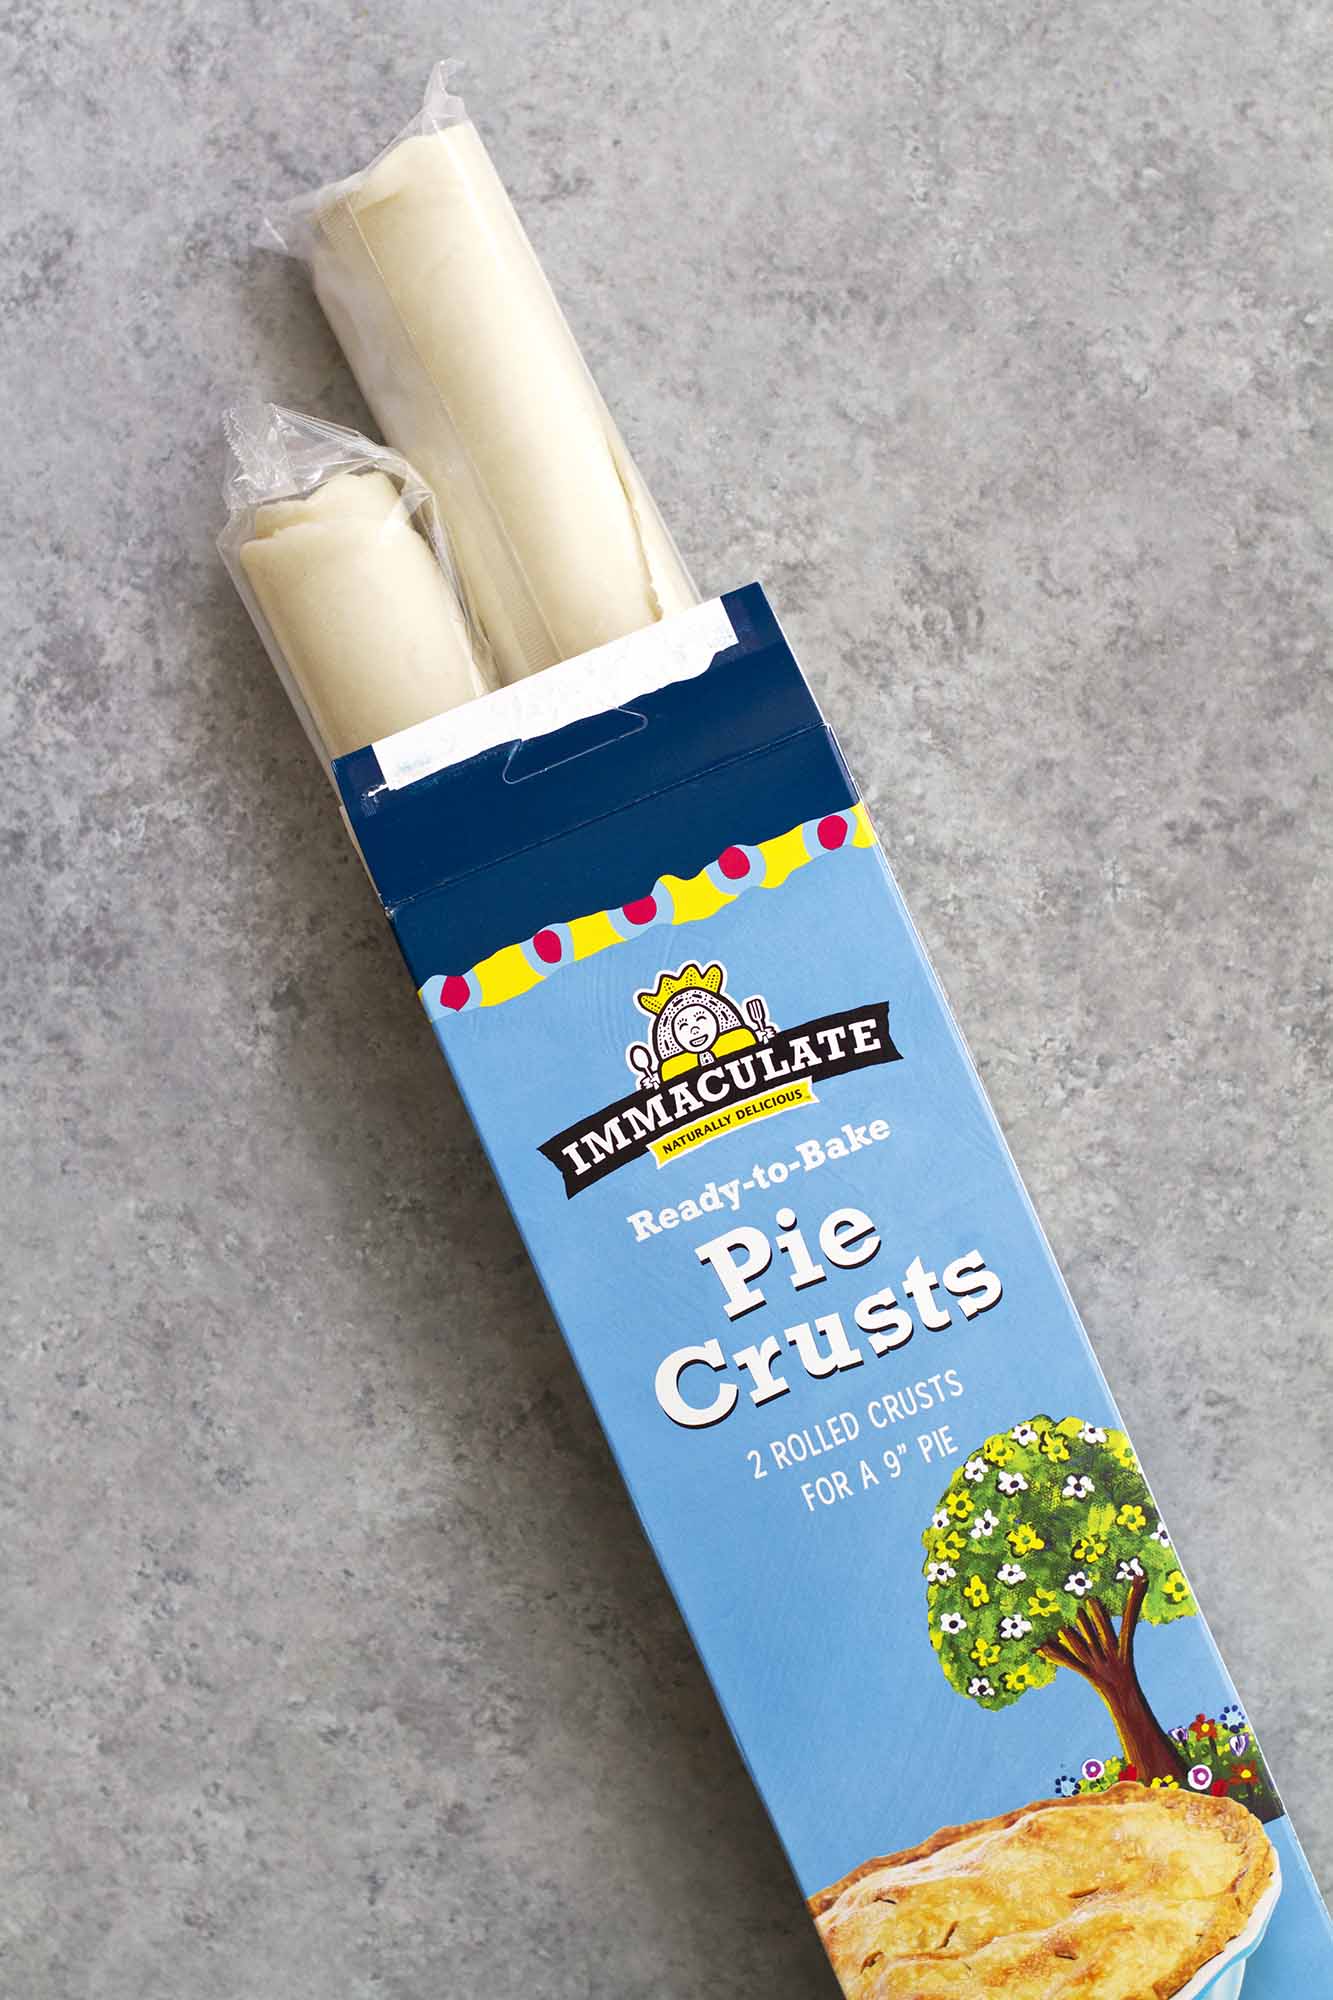 Immaculate Baking pie crusts box